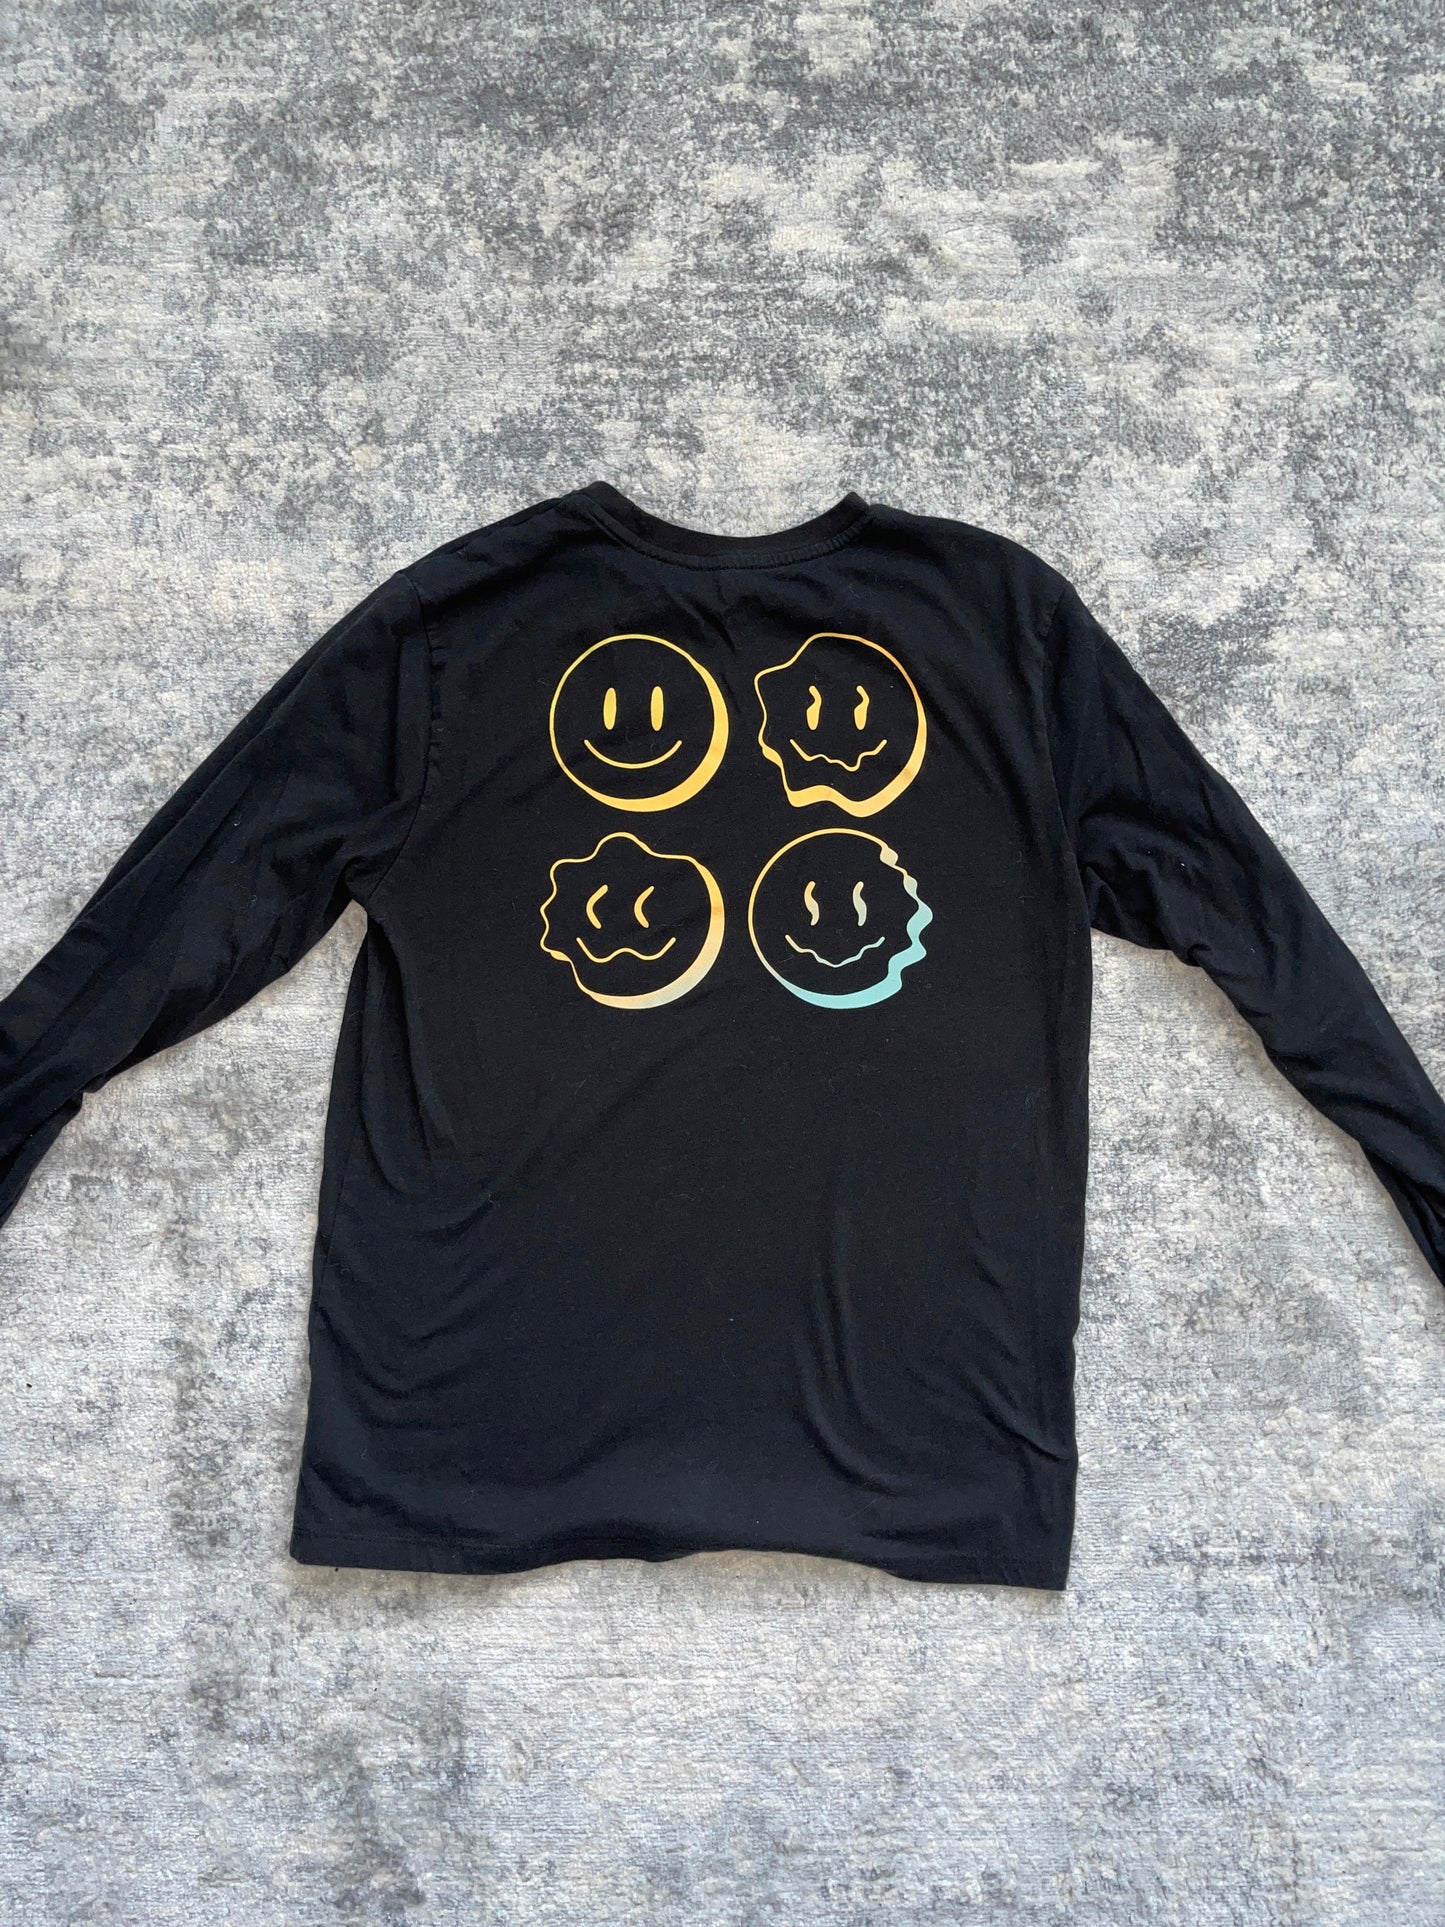 Art Class Boys Smiley Face Graphic Long-Sleeved TShirt XL 16- PPU Montgomery